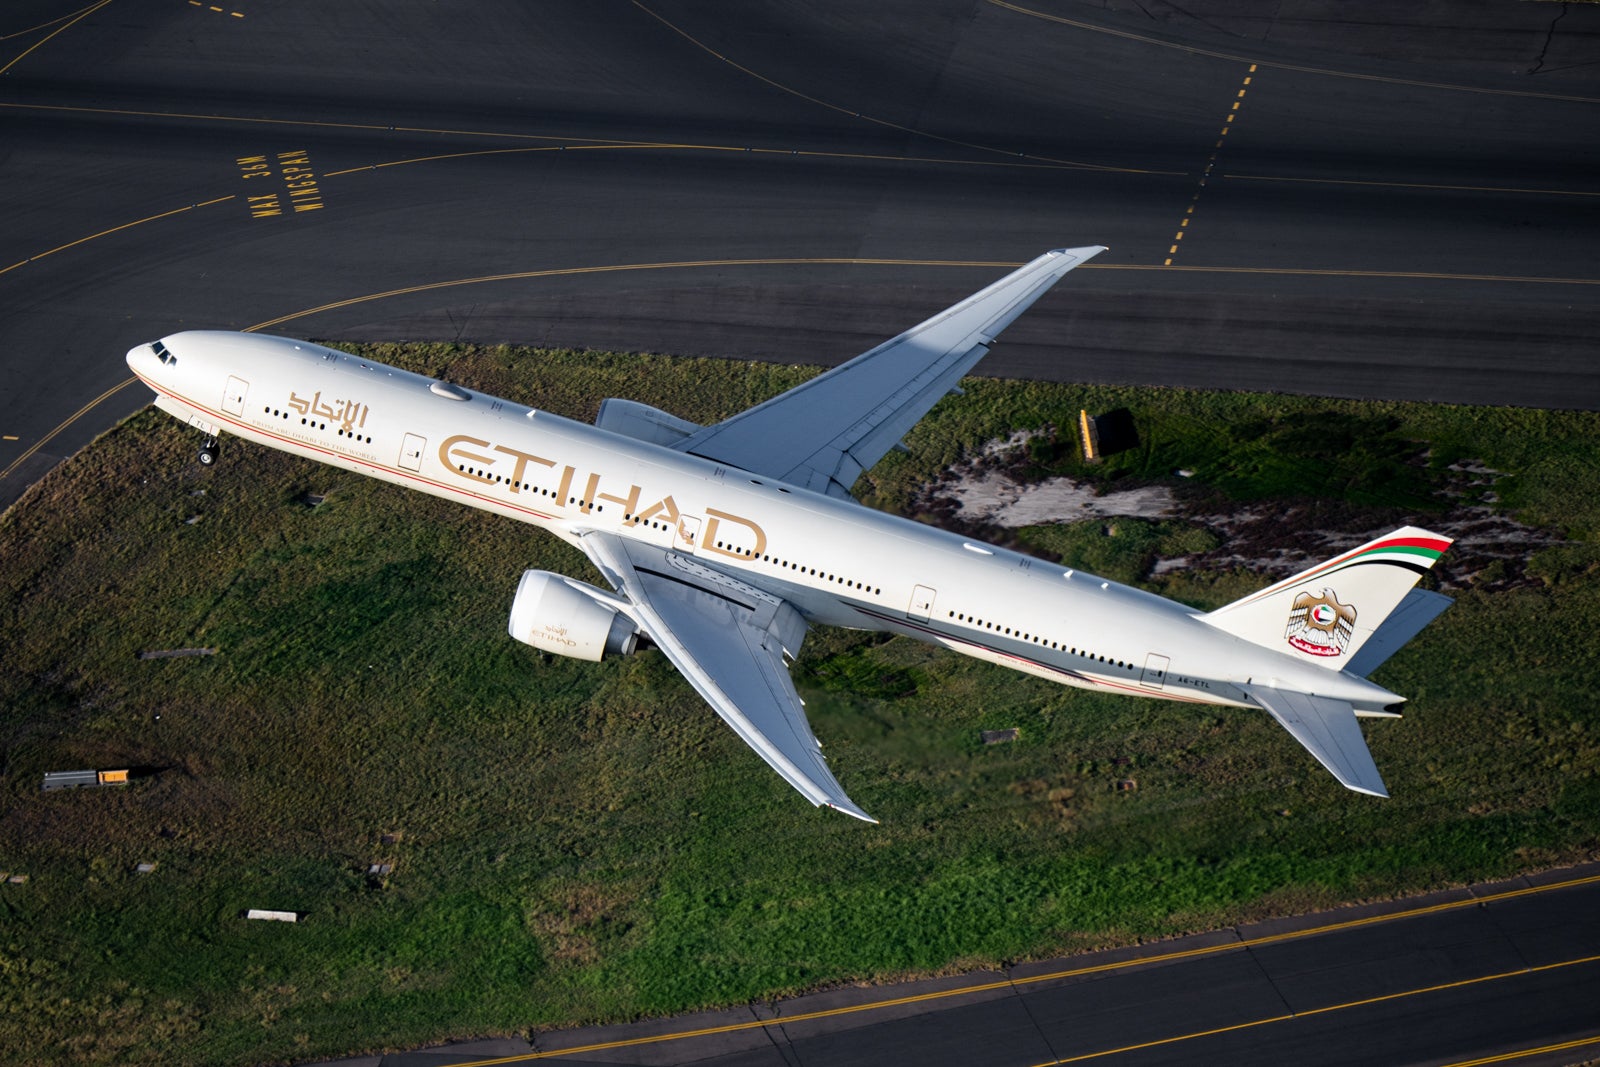 Etihad-777-300ER-old-livery-3-at-Sydney-Airport-SYD